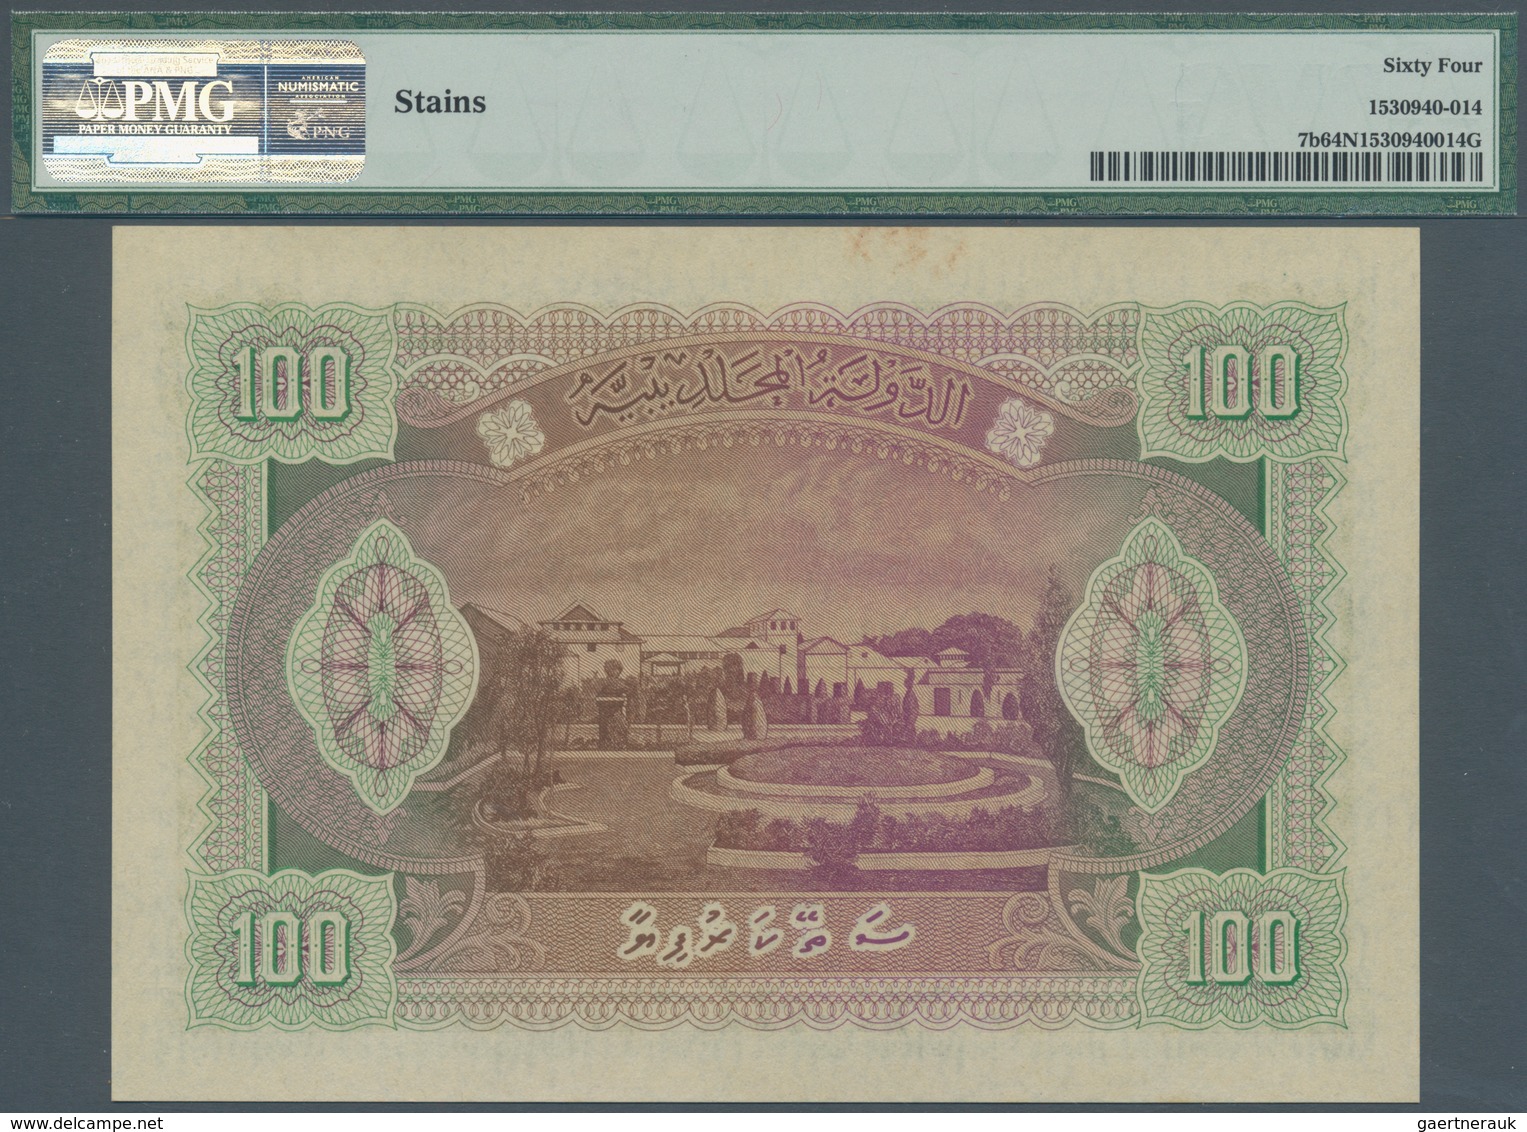 01999 Maldives / Malediven: Set Of 6 Notes Containing 1 To 100 Rupees 1960 P. 2b-7b, All PMG Graded 64 Cho - Maldive